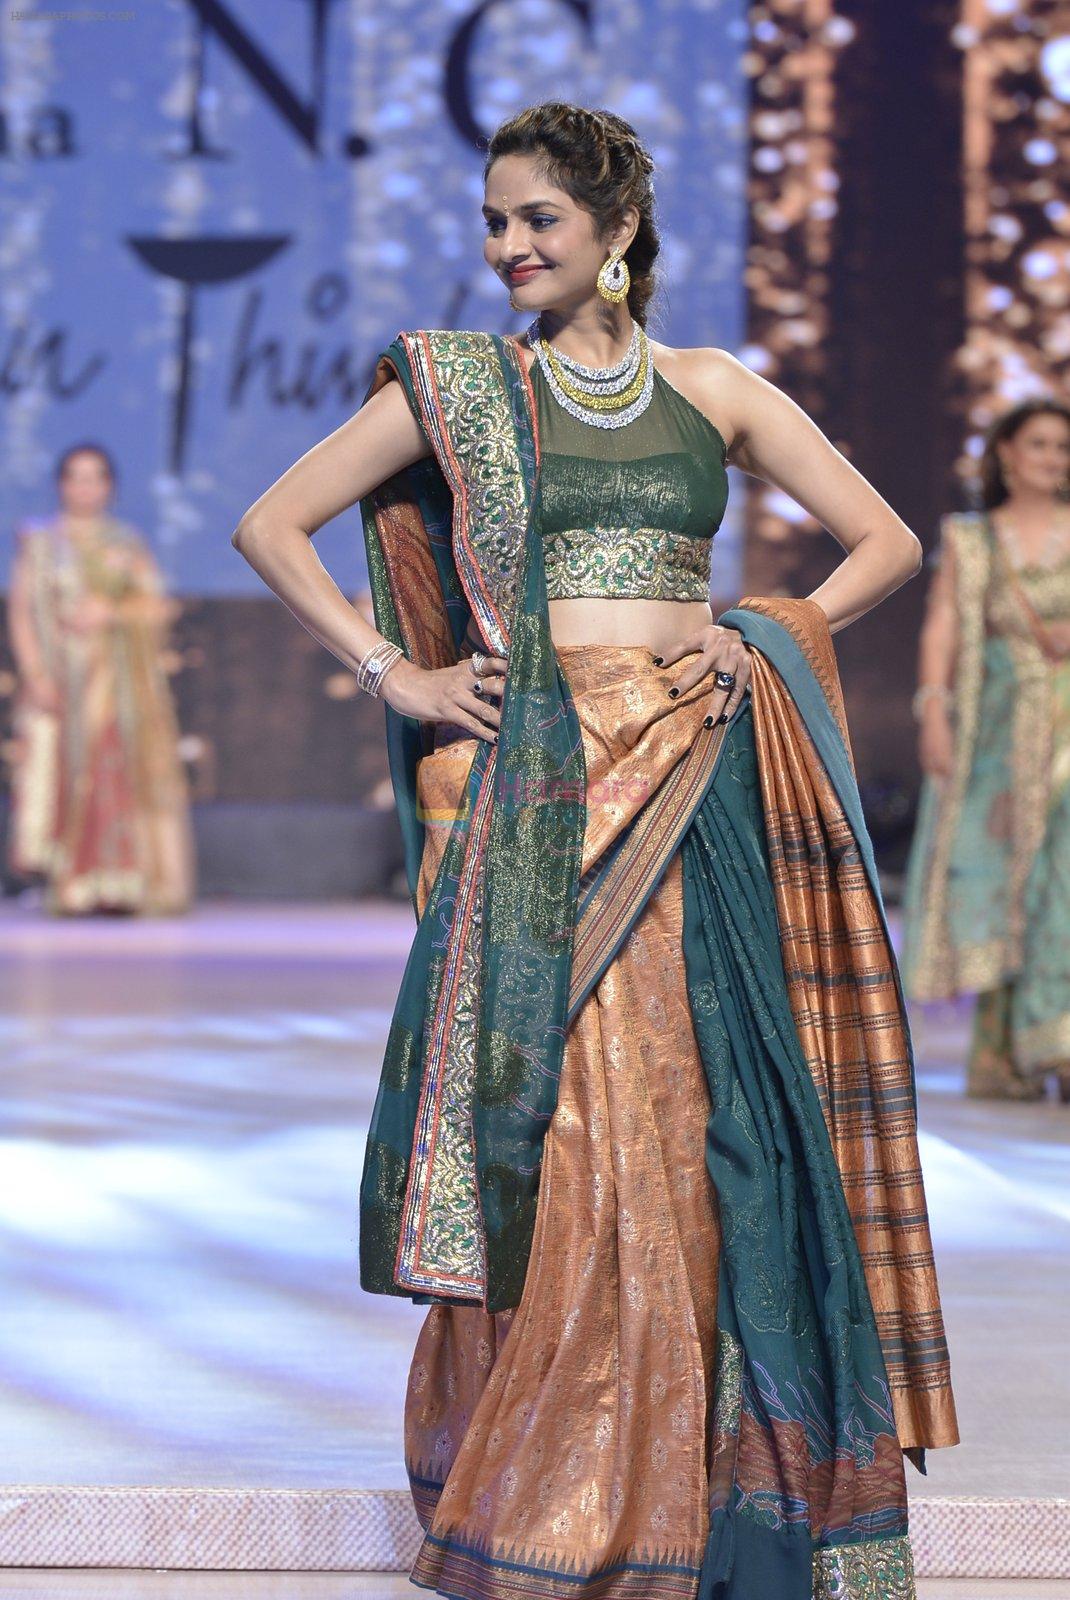 Madhoo Shah walk the ramp for Shaina NC's show at CPAA Fevicol SHOW on 20th March 2016